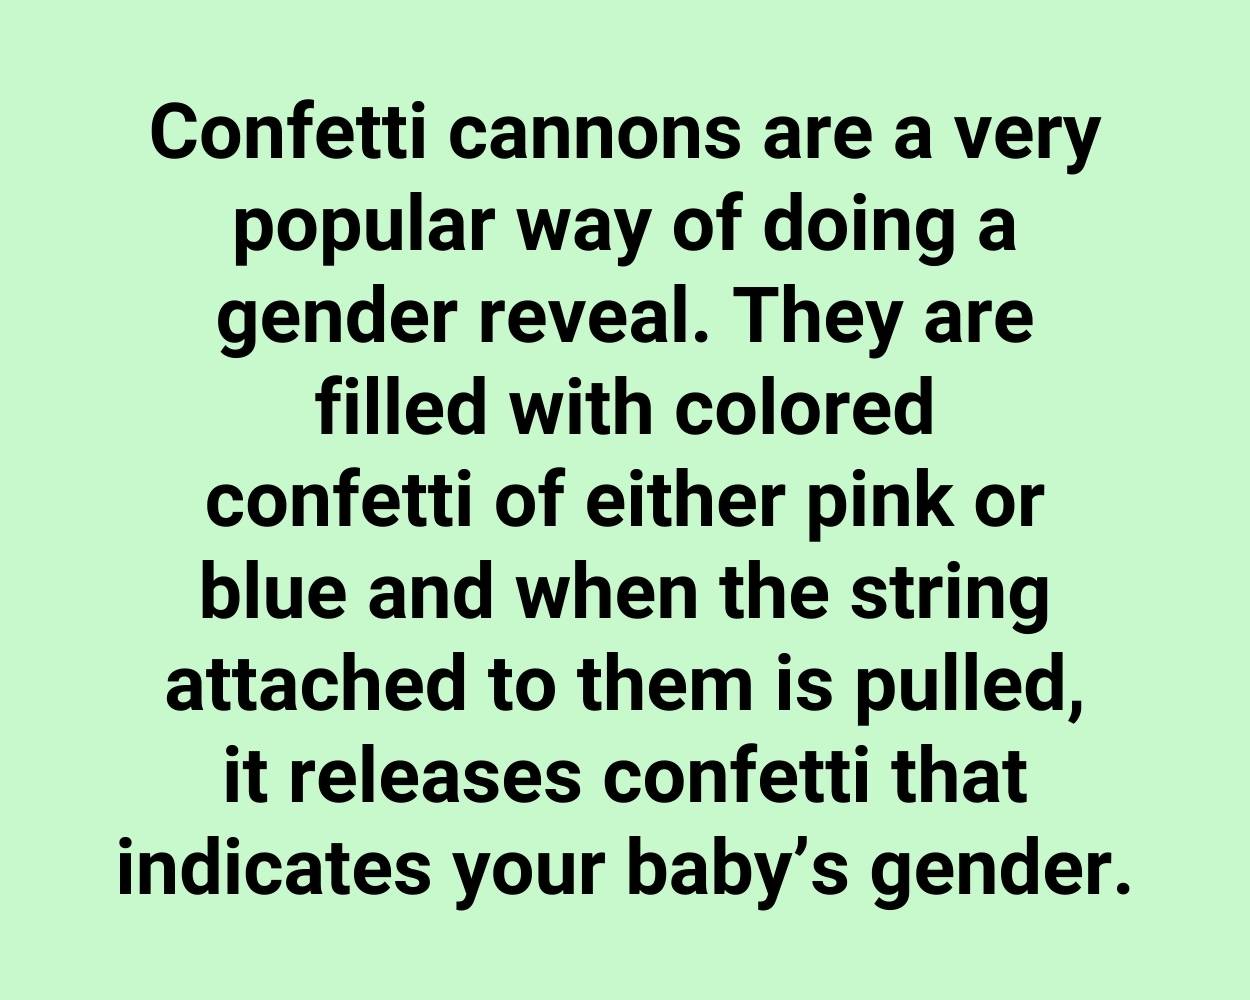 Confetti cannons are a very popular way of doing a gender reveal. They are filled with colored confetti of either pink or blue and when the string attached to them is pulled, it releases confetti that indicates your baby’s gender.